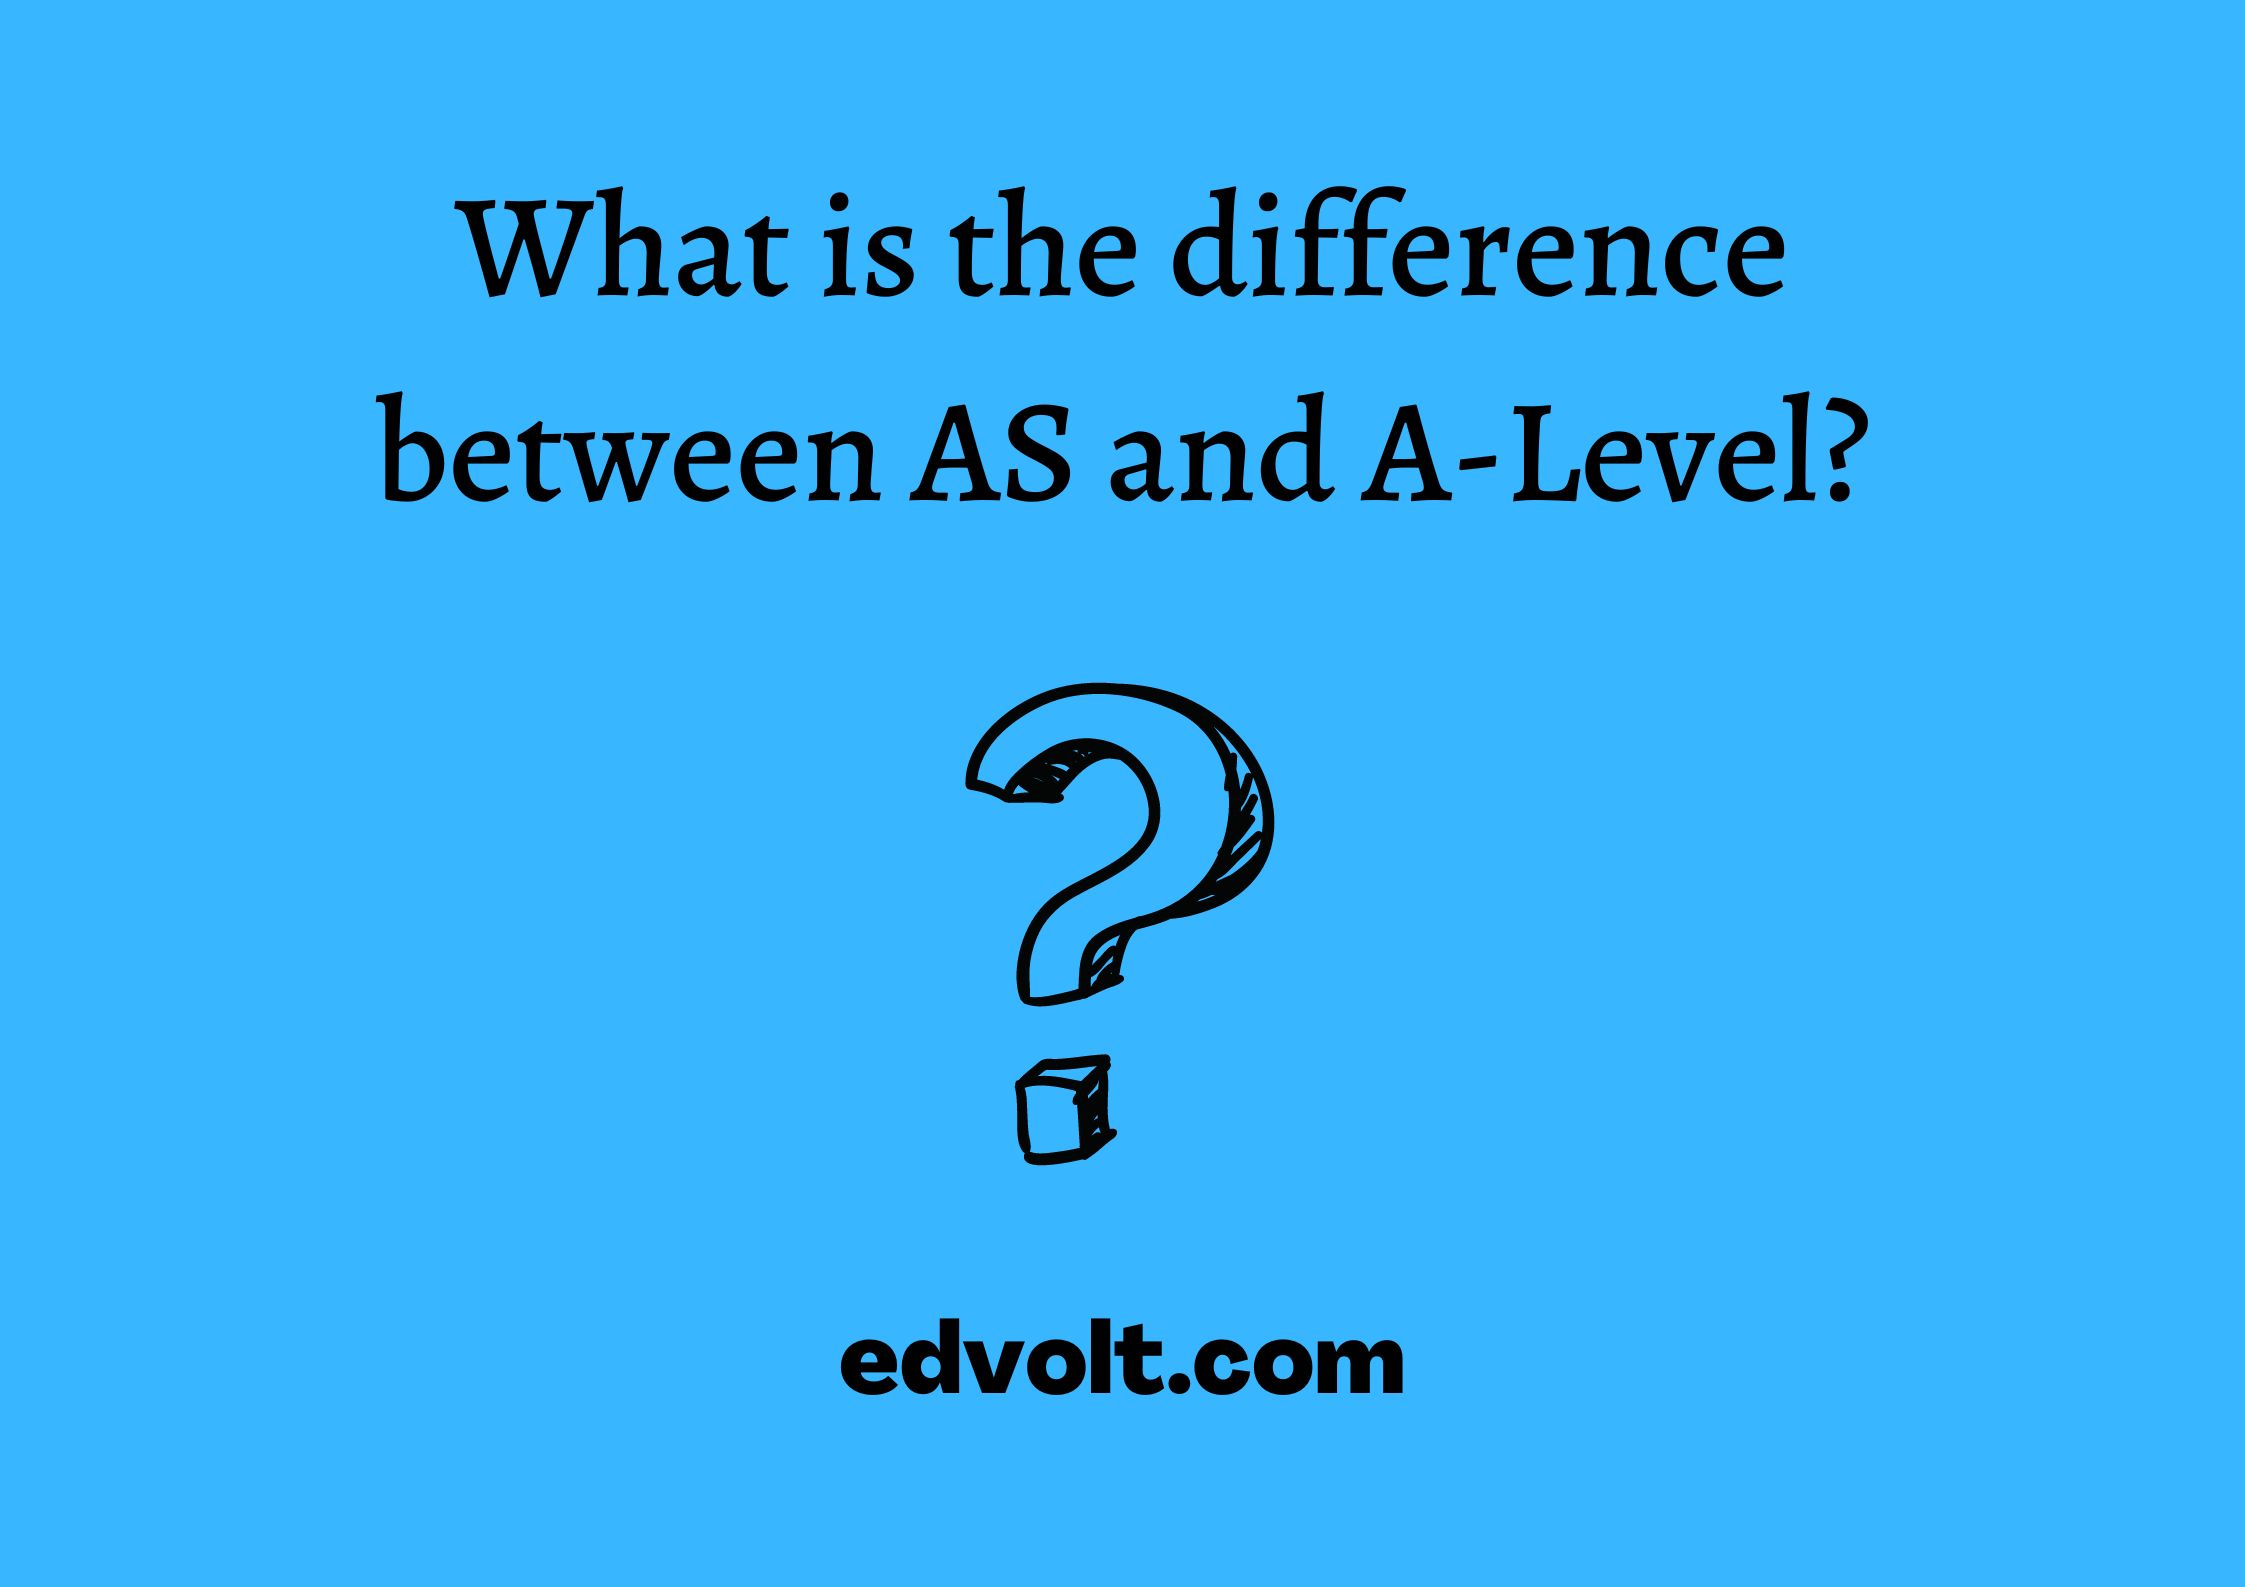 What is the difference between AS and A-Level?